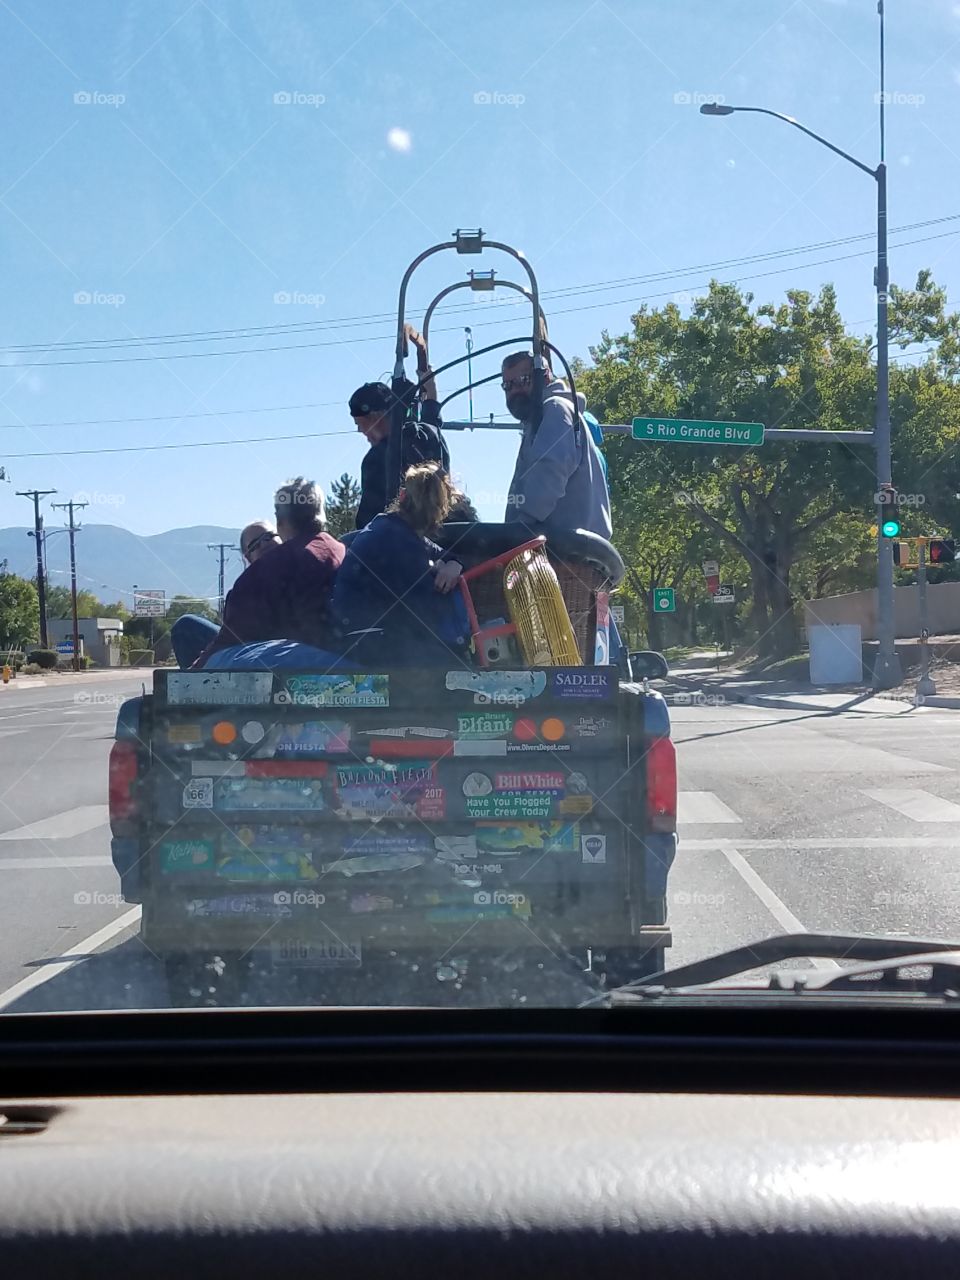 Only in New Mexico